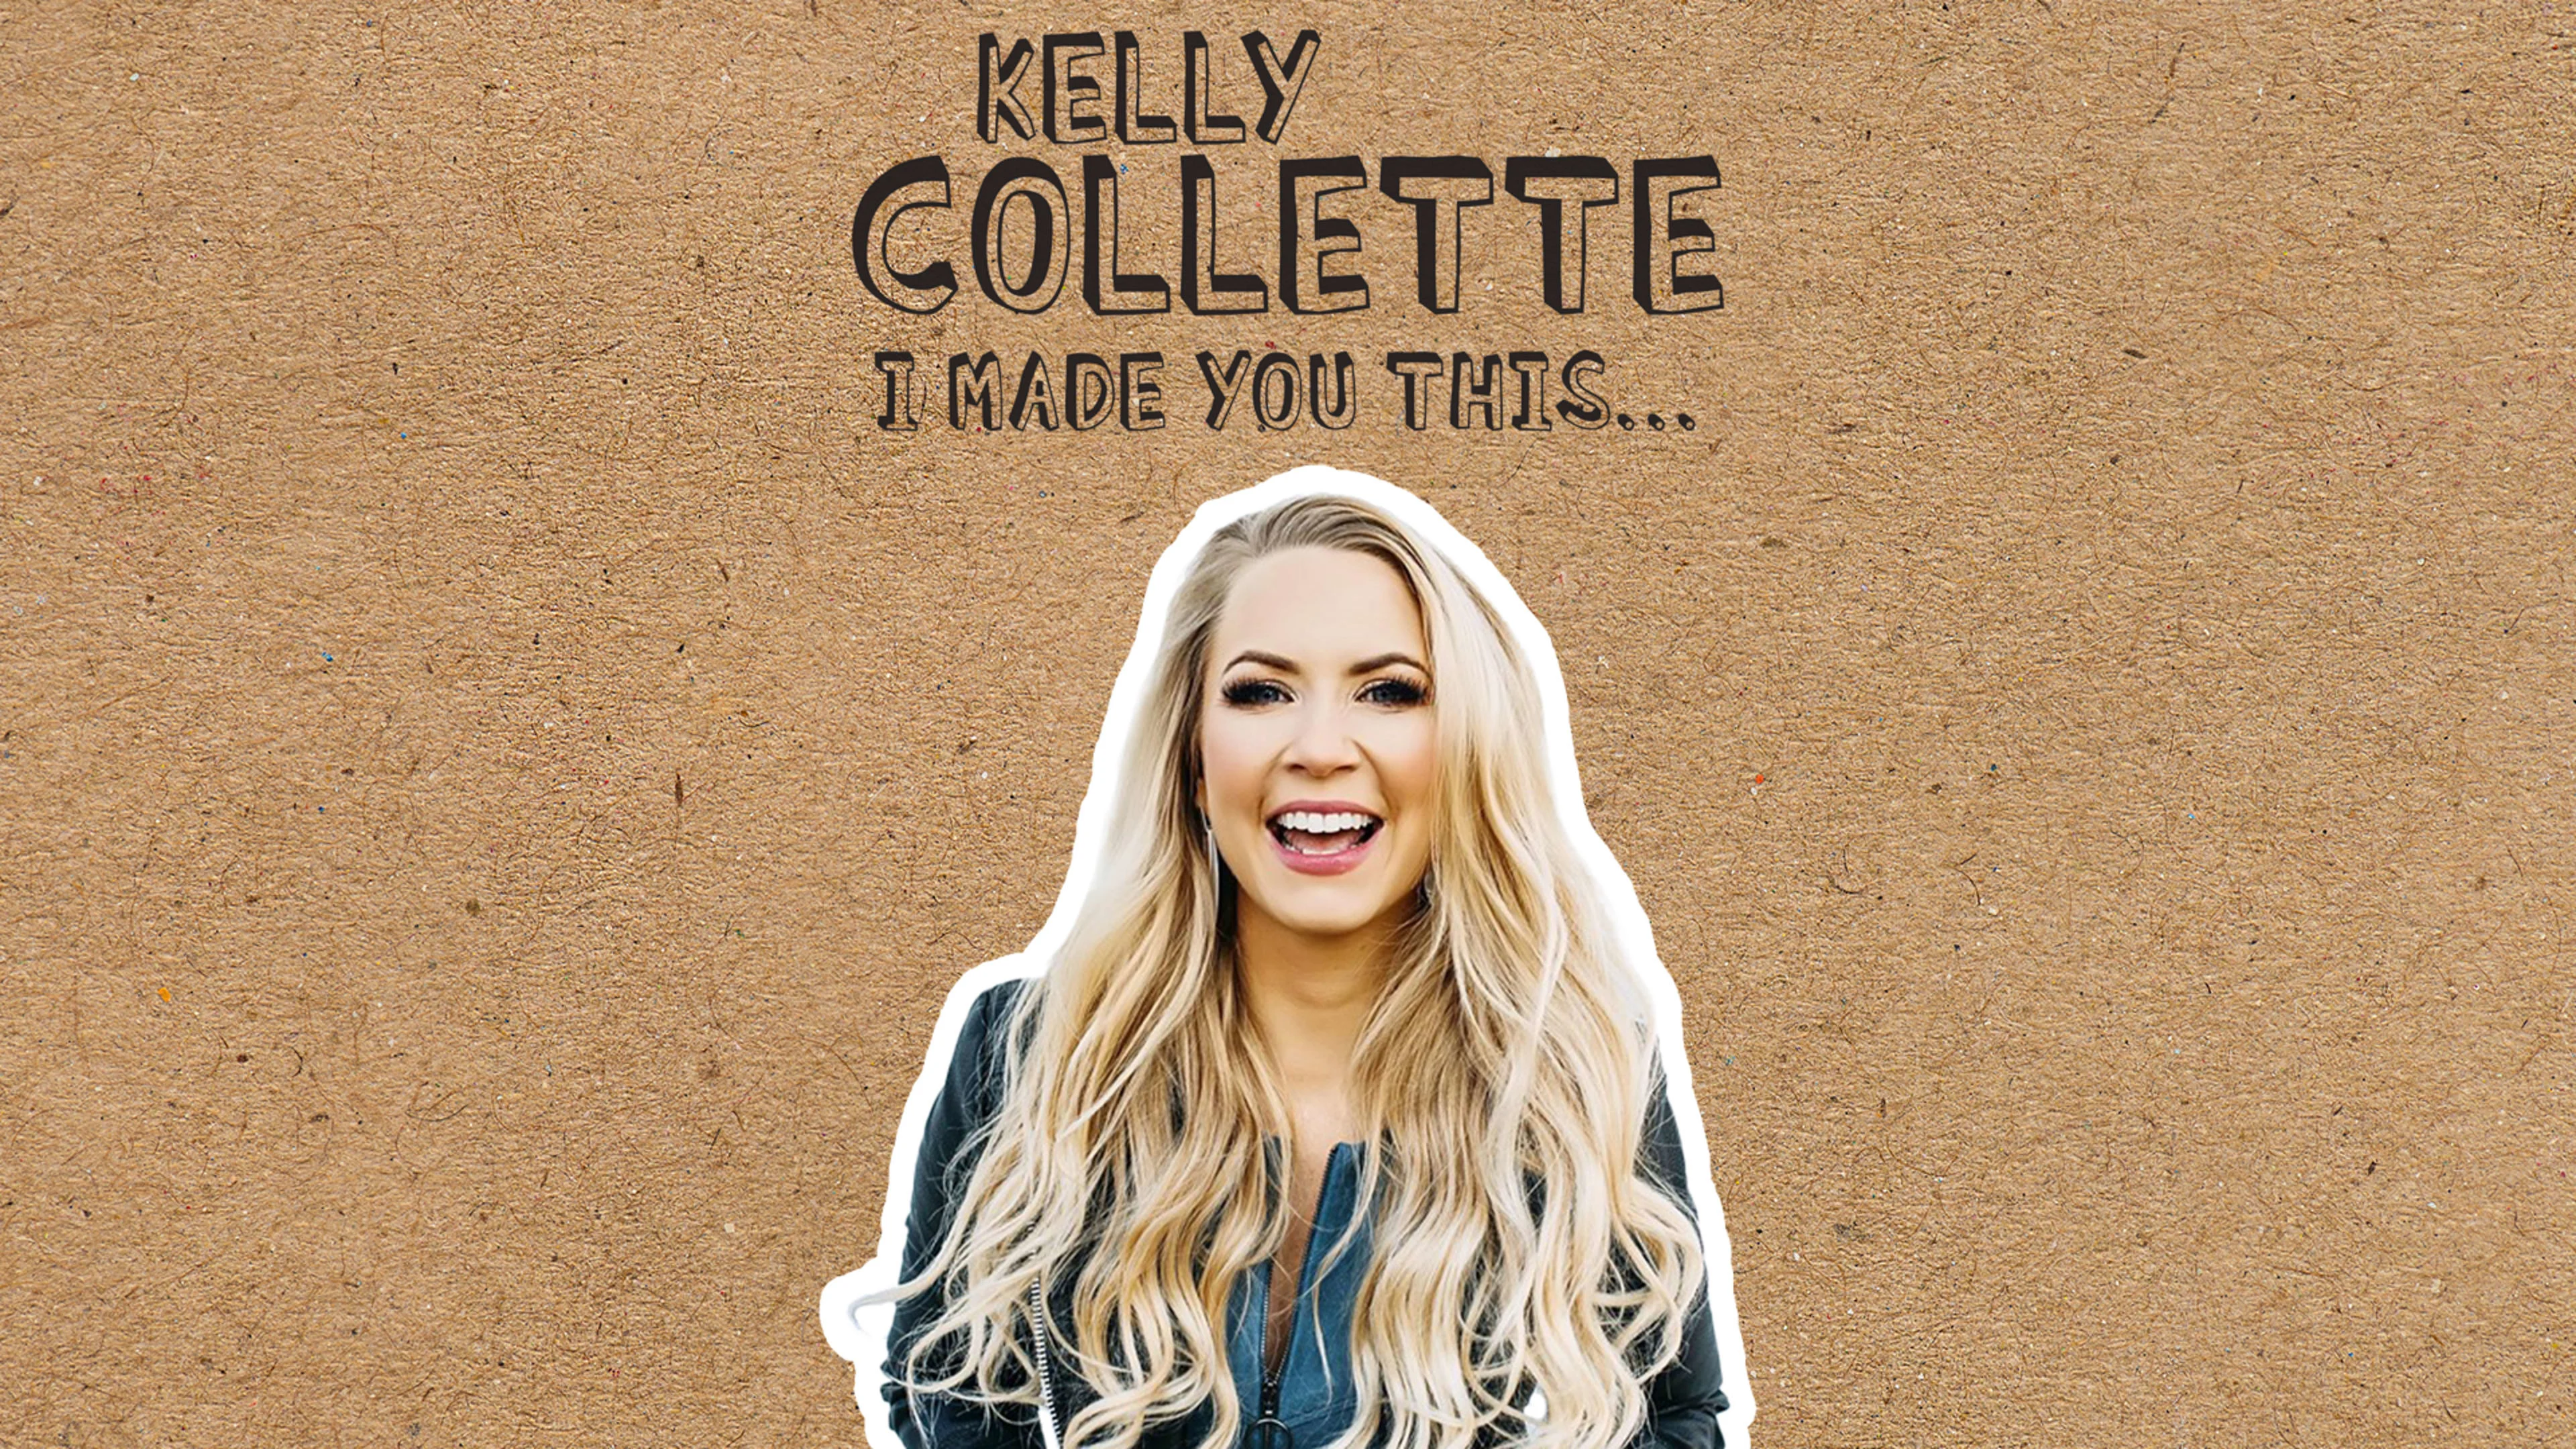 Kelly Collette - I Made You This...